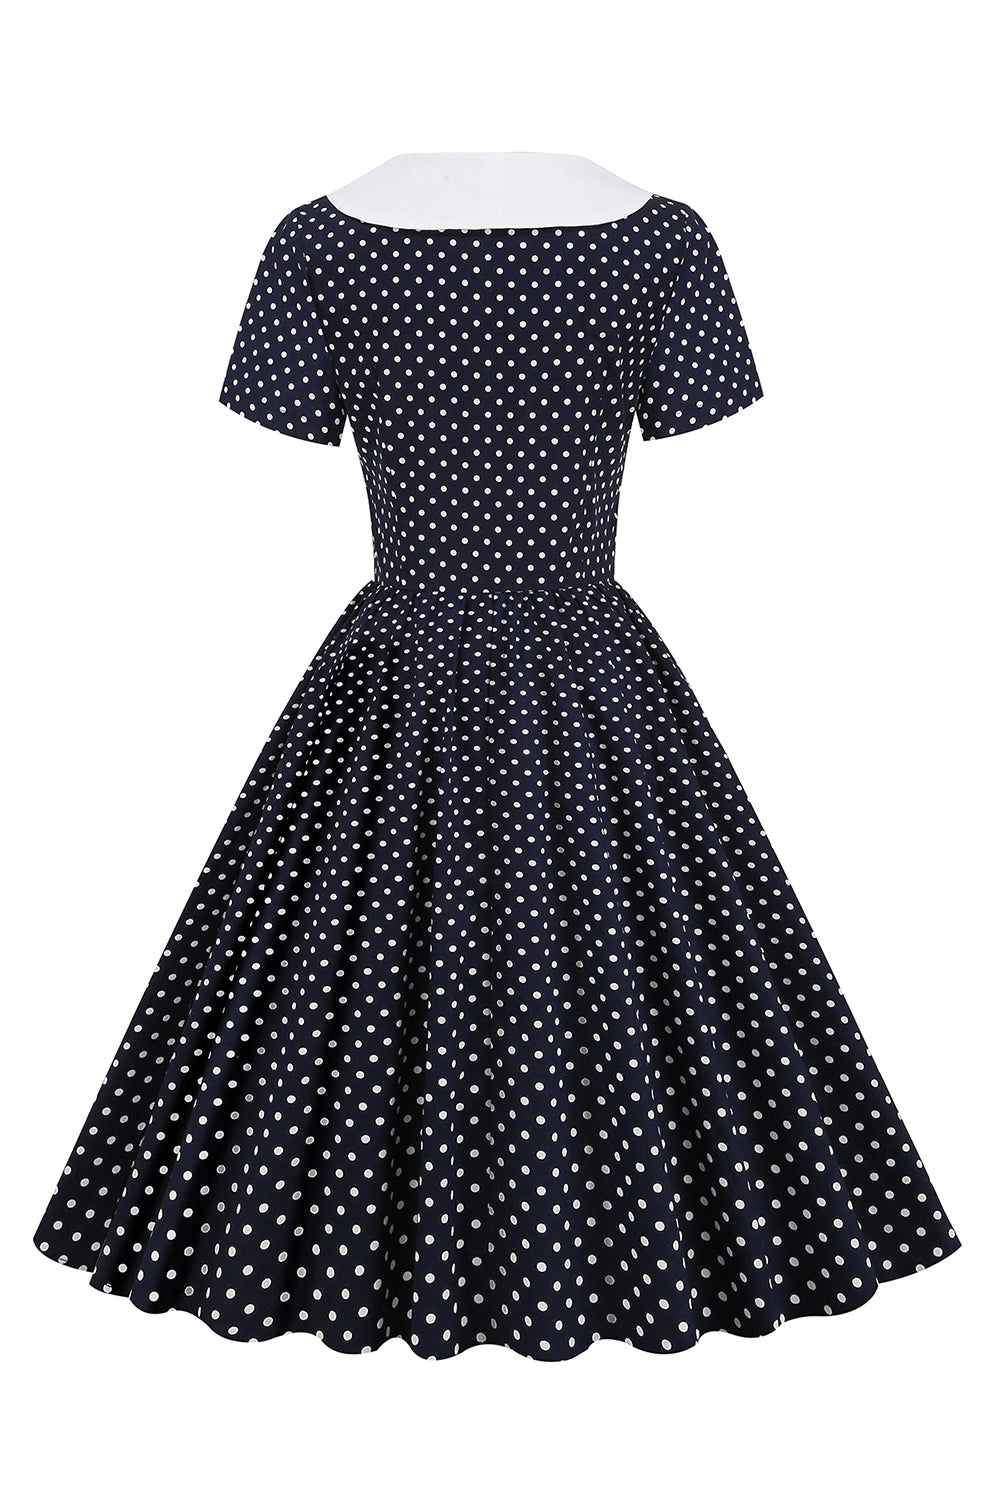 Black and White Polka Dots Vintage 1950s Dress with Bowknot